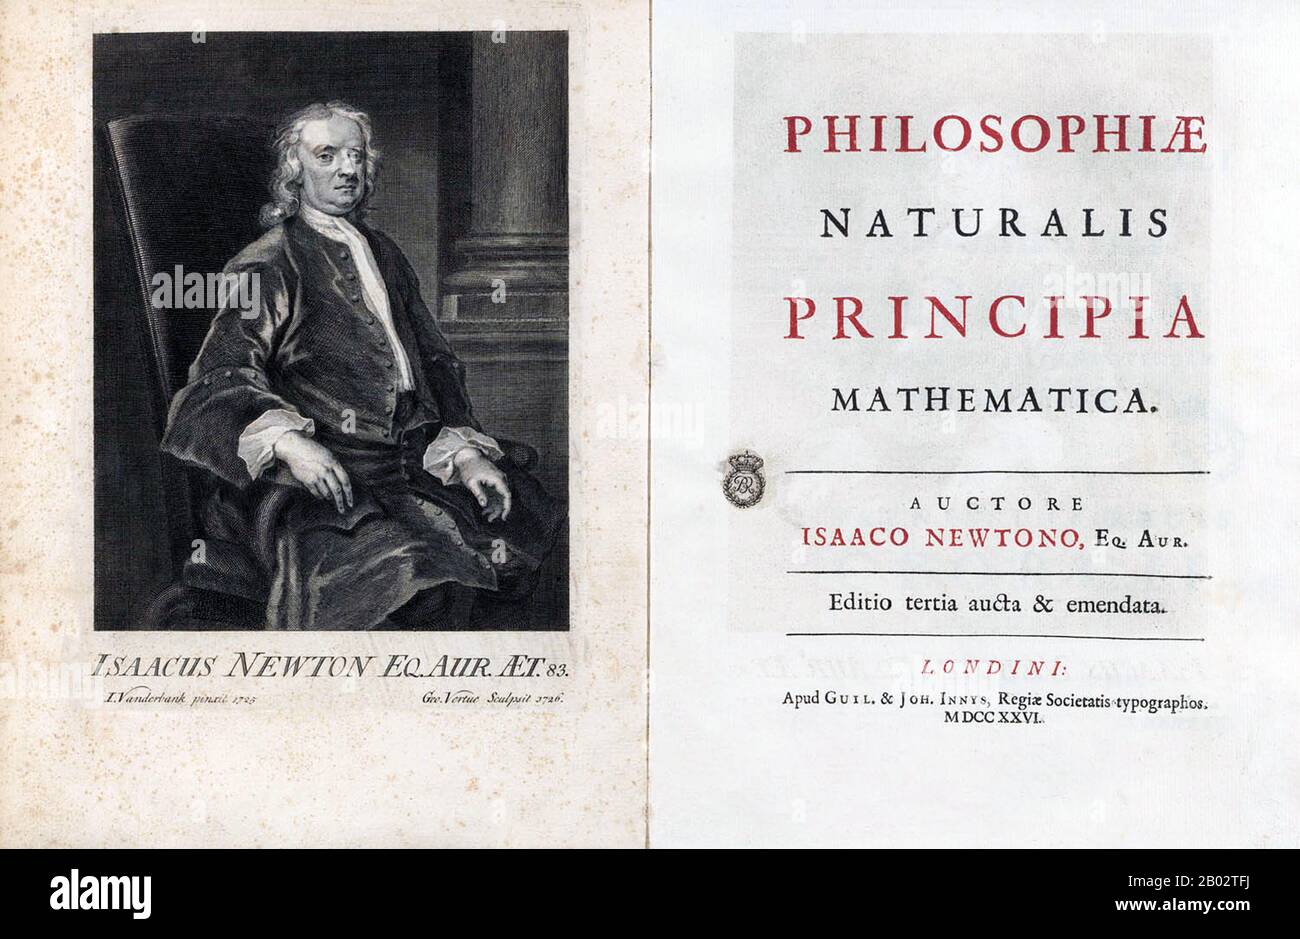 Philosophiæ Naturalis Principia Mathematica, Latin for 'Mathematical Principles of Natural Philosophy', often referred to as simply the Principia, is a work in three books by Sir Isaac Newton, in Latin, first published 5 July 1687.  After annotating and correcting his personal copy of the first edition, Newton also published two further editions, in 1713 and 1726. The Principia states Newton's laws of motion, forming the foundation of classical mechanics, also Newton's law of universal gravitation, and a derivation of Kepler's laws of planetary motion (which Kepler first obtained empirically). Stock Photo